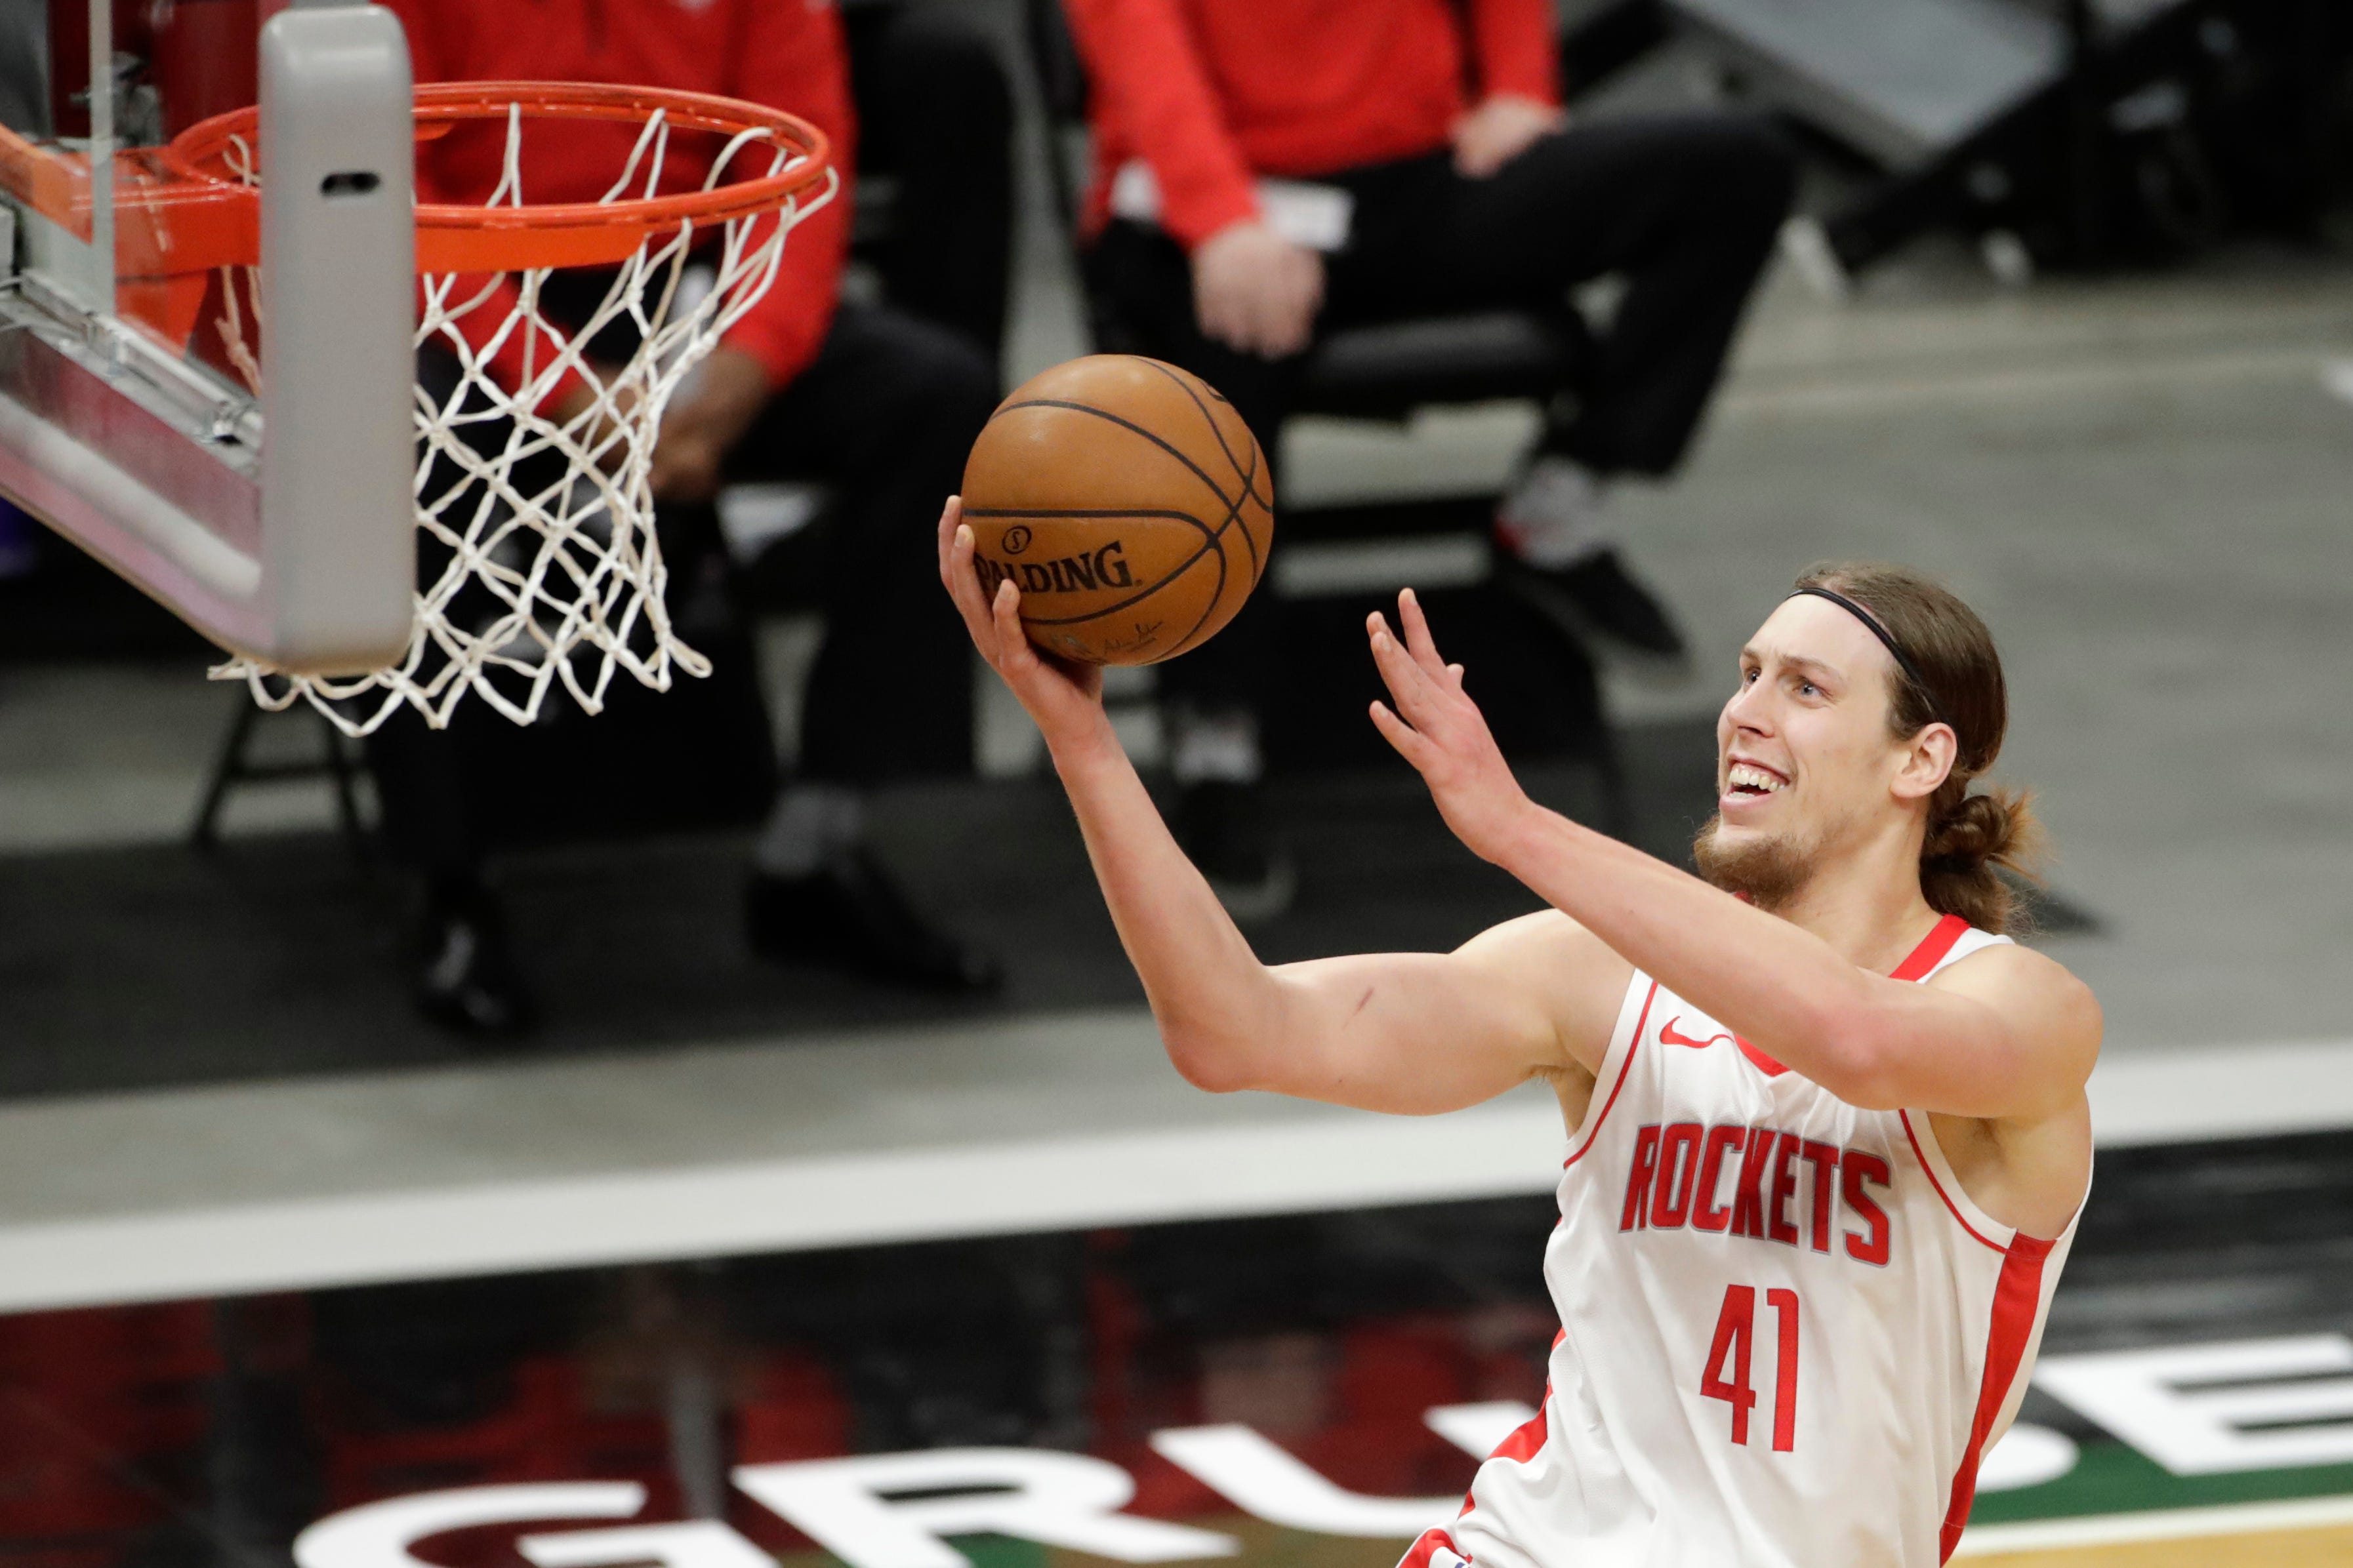 Kelly Olynyk split time with the Heat and Rockets last season, averaging 13.5 points and seven rebounds over 70 games.